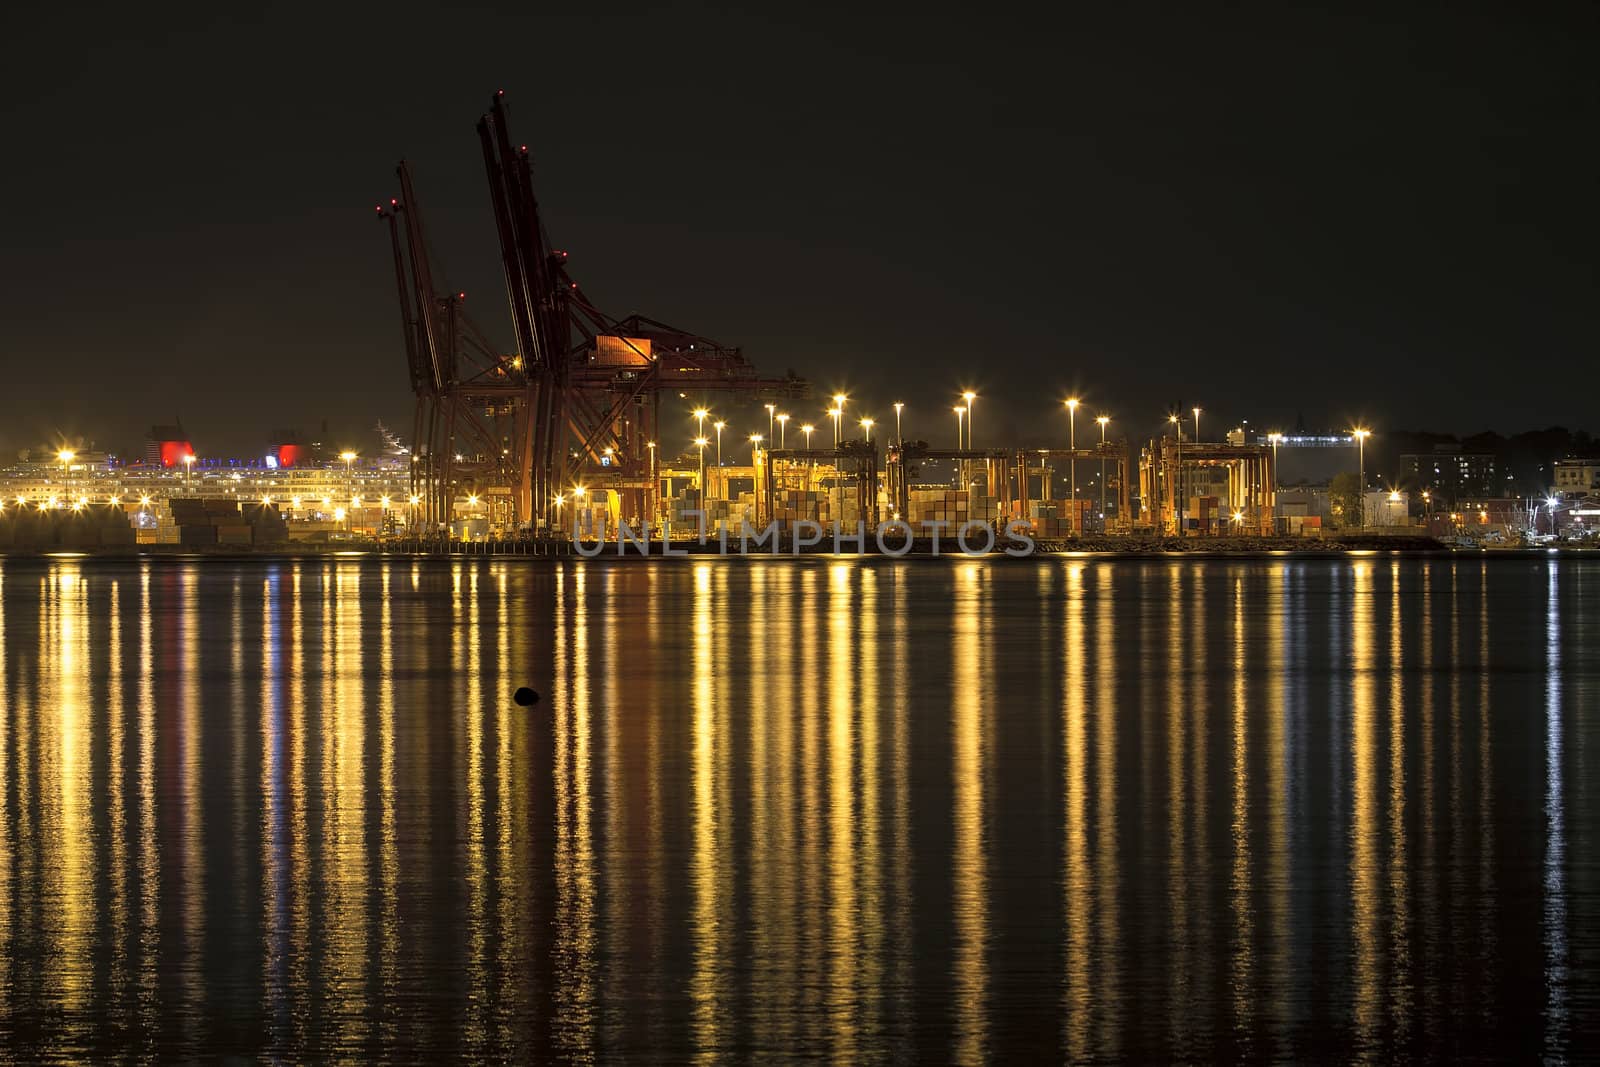 Port of Vancouver BC Canada by jpldesigns